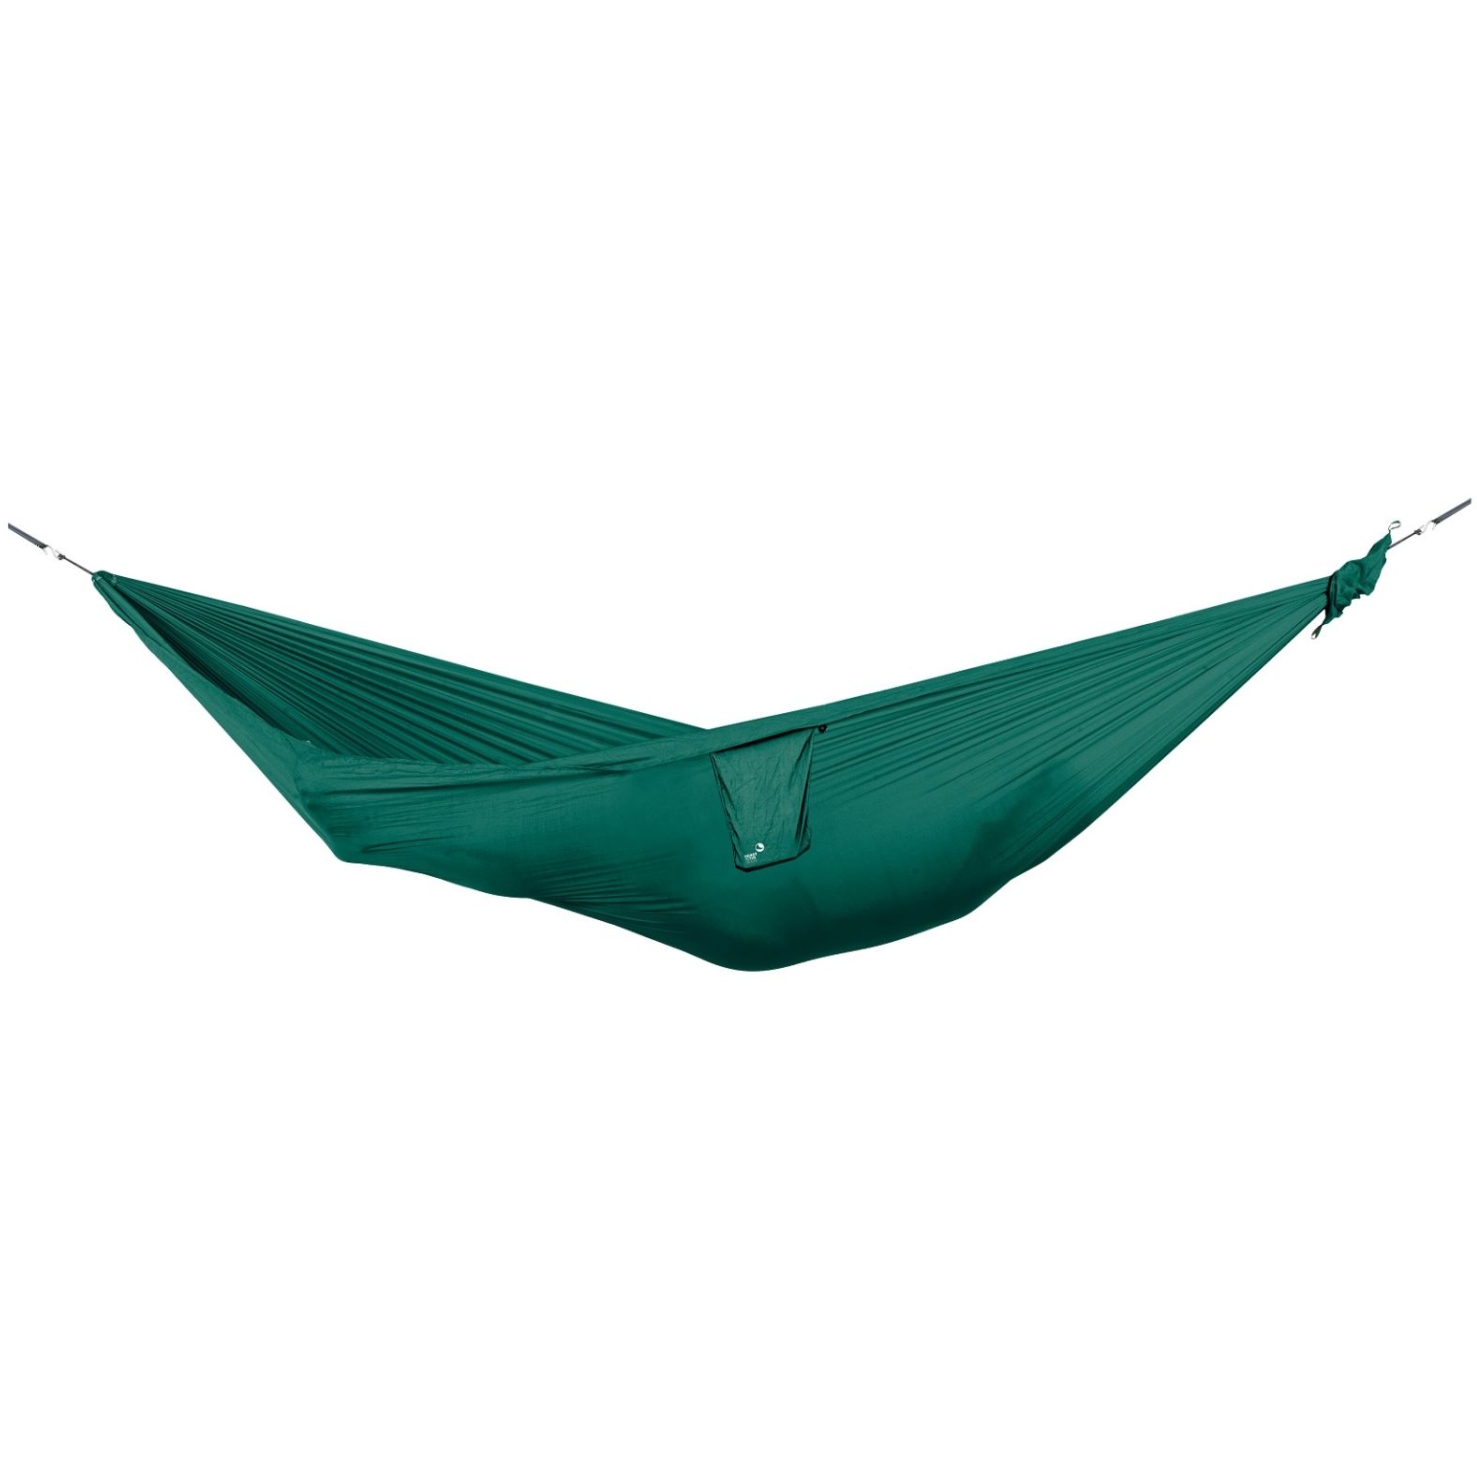 Picture of Ticket To The Moon Travel Compact Hammock - Emerald Green